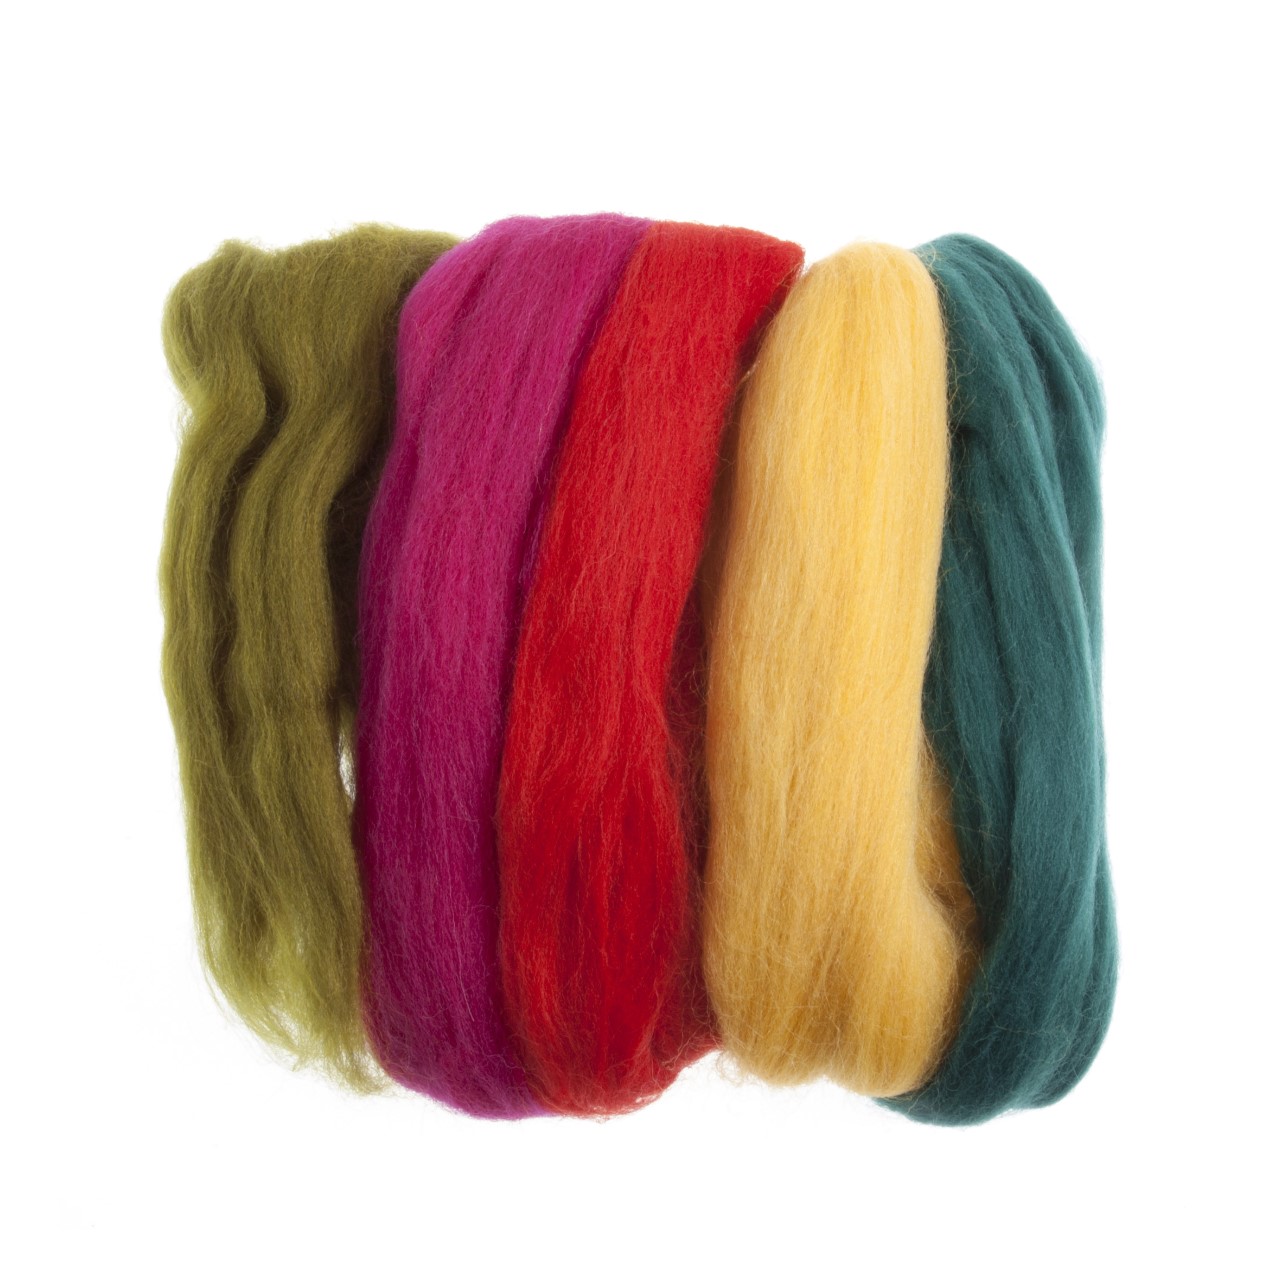 Natural Wool Roving: 50g: Assorted Brights